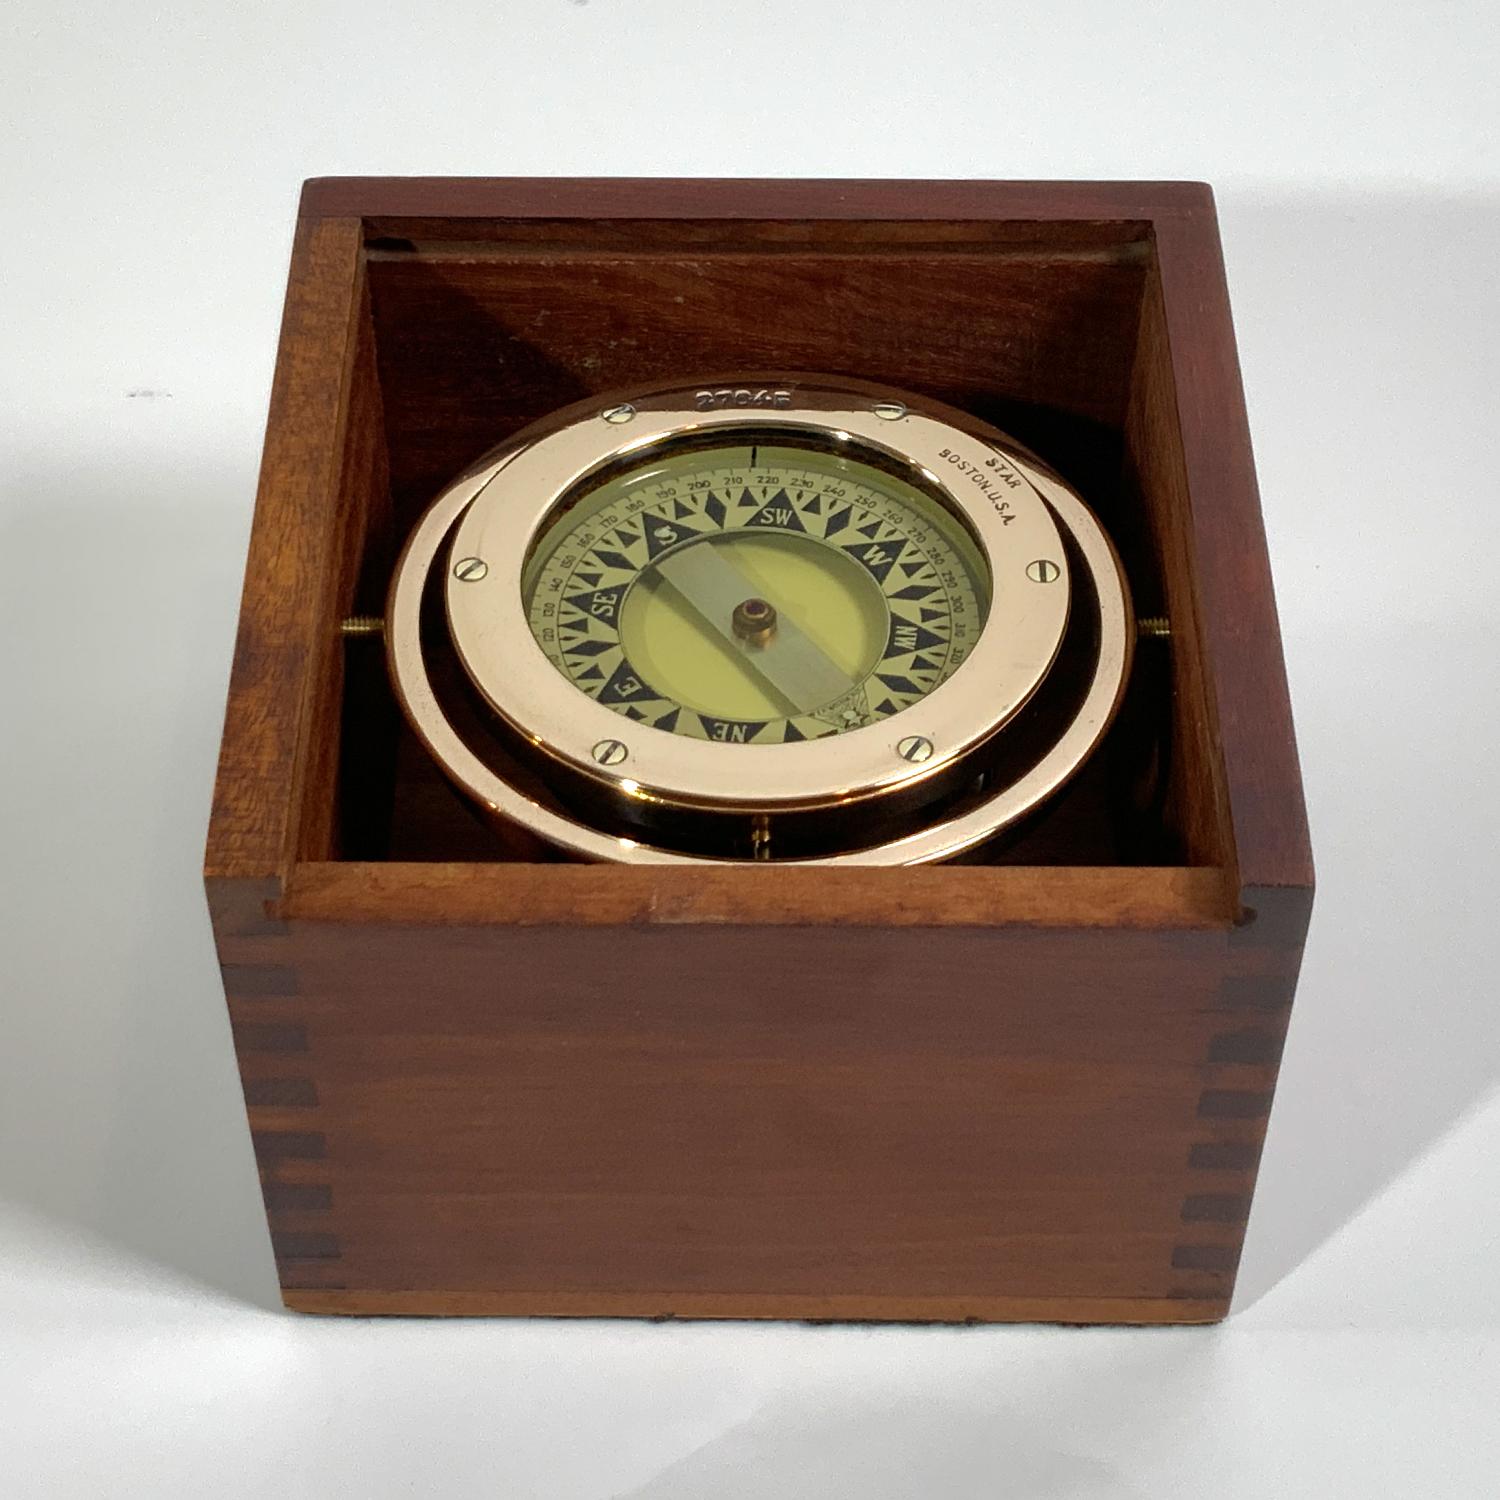 Gimballed brass boat or yacht compass by Star of Boston. Bezel is pierced with number 27645. Beautiful polish job on the brass. Fitted to a varnished wood box with sliding lid. Circa 1940. Perfect display piece. Great gift.